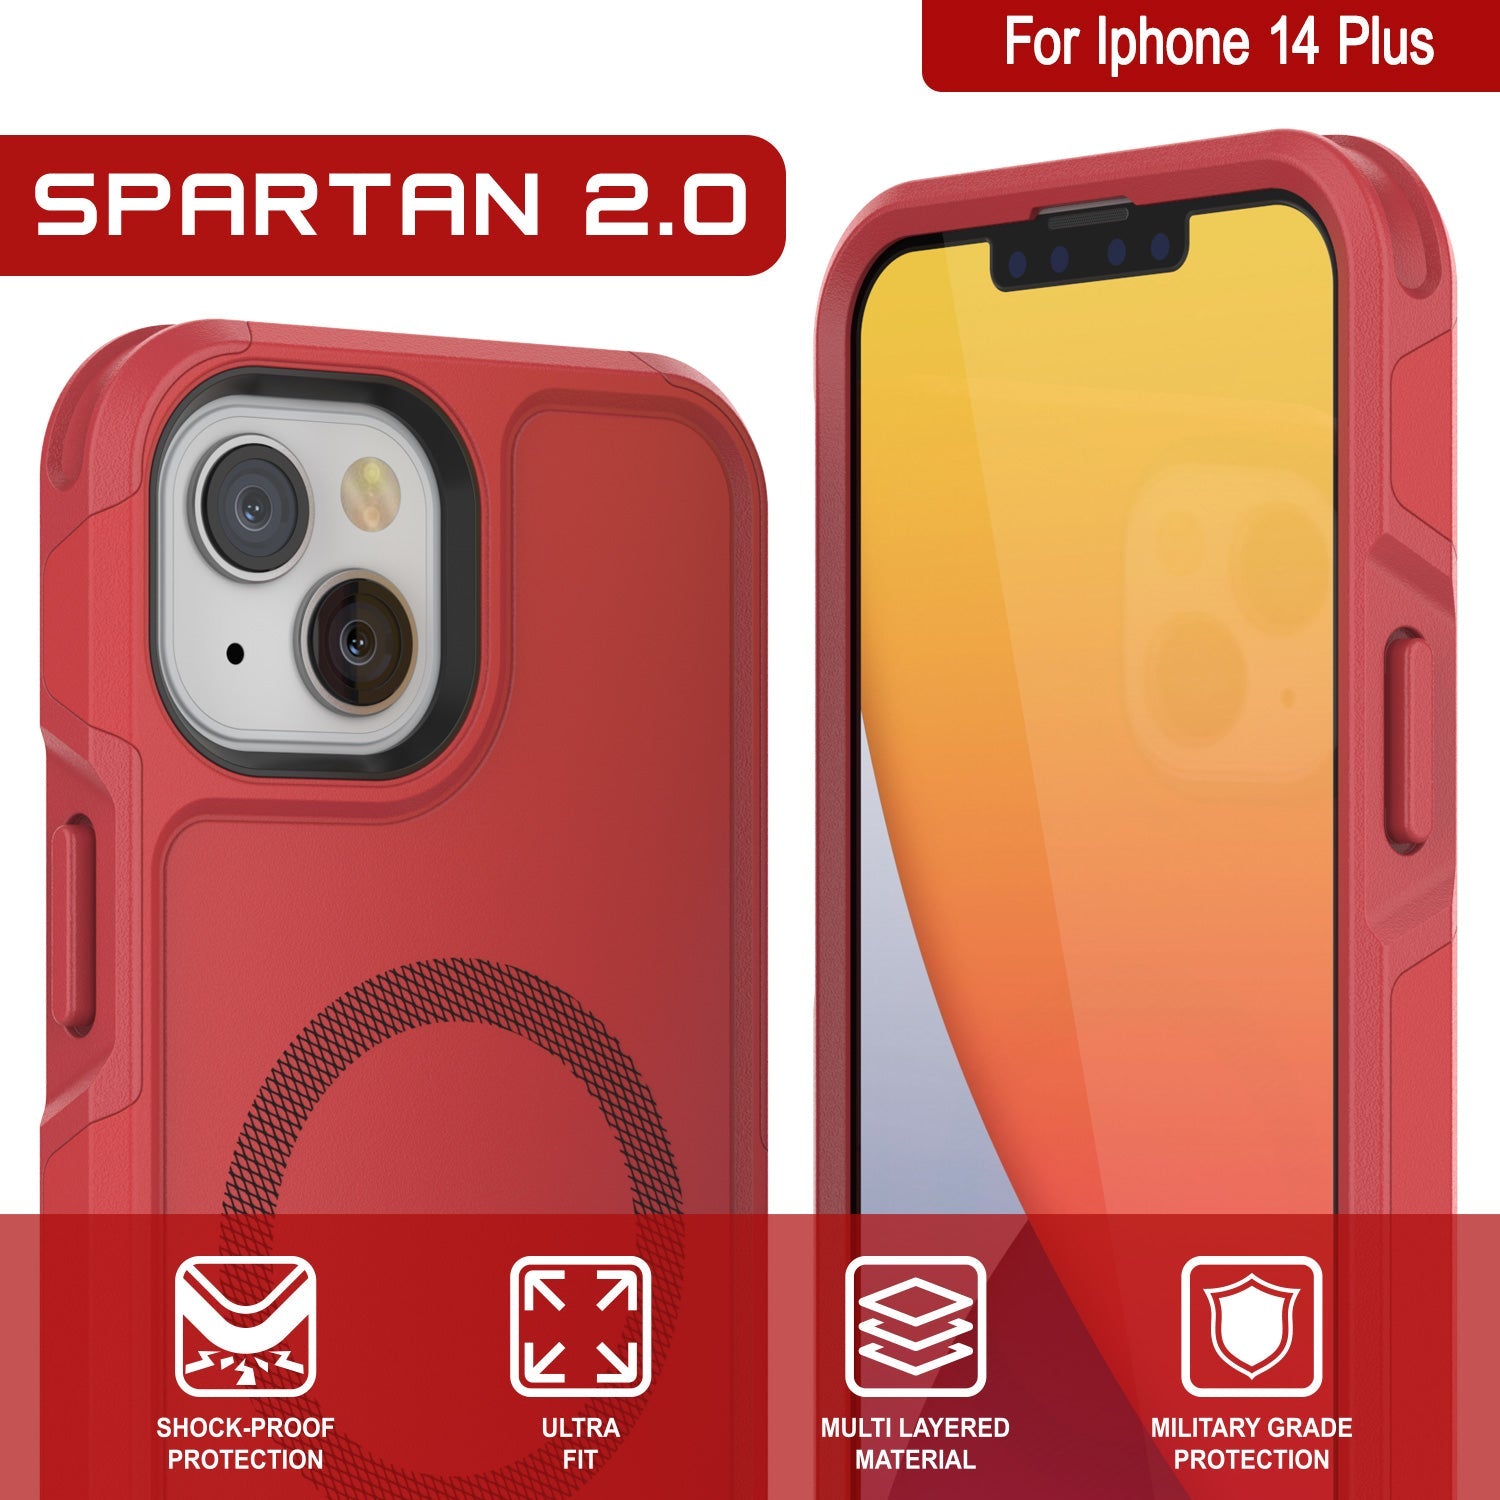 PunkCase iPhone 14 Plus Case, [Spartan 2.0 Series] Clear Rugged Heavy Duty Cover W/Built in Screen Protector [Red]